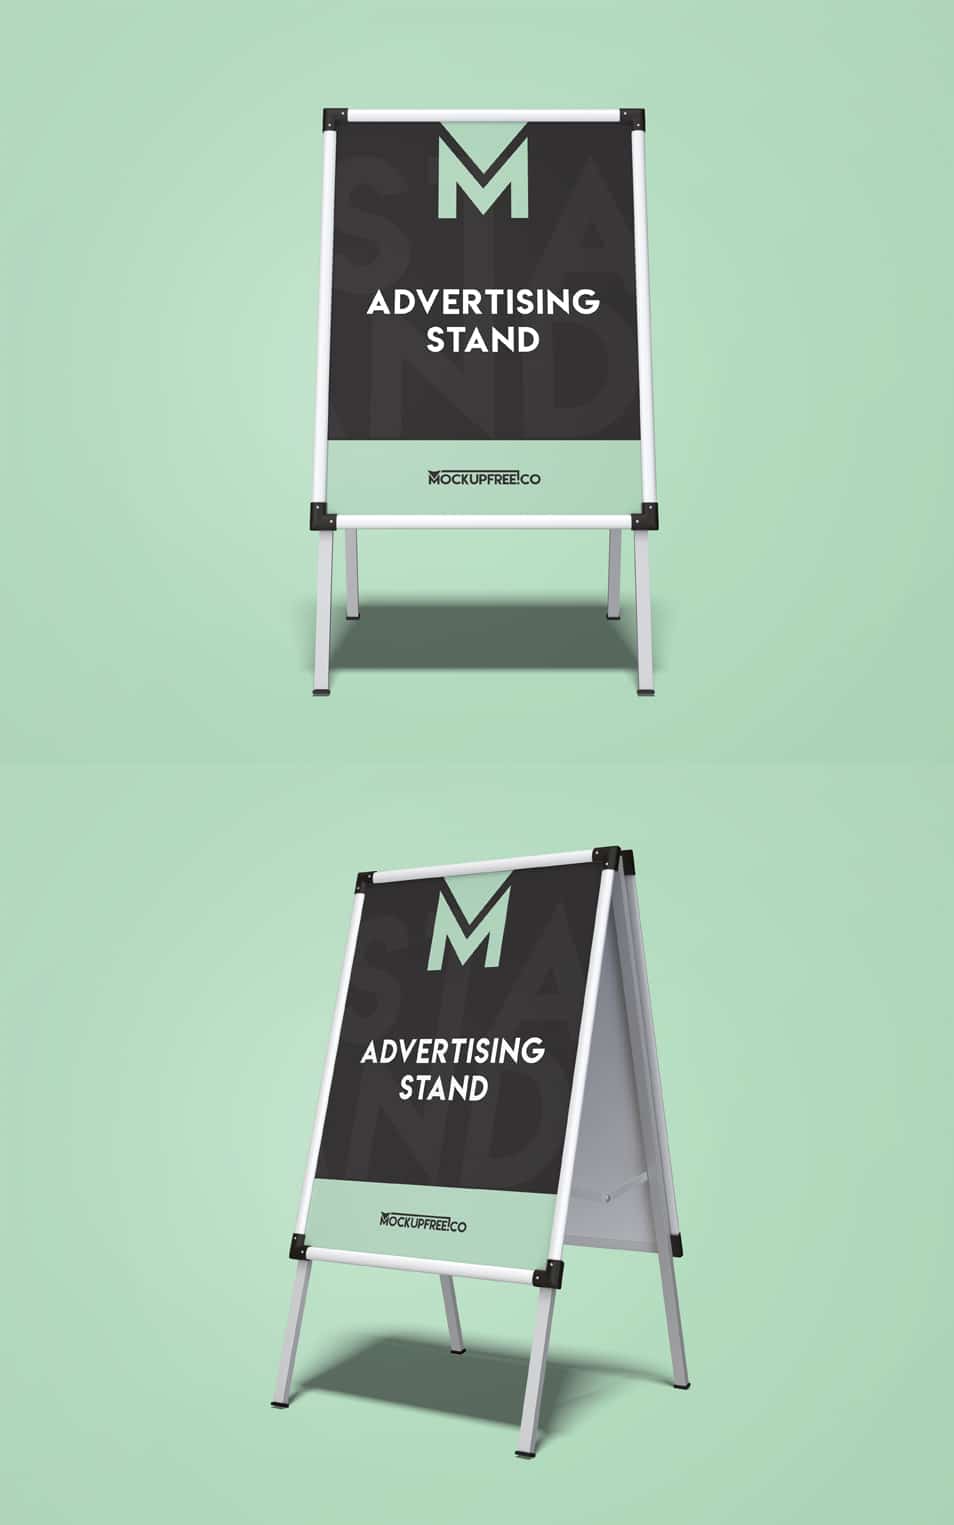 Advertising Stand 2 Free PSD Mockups